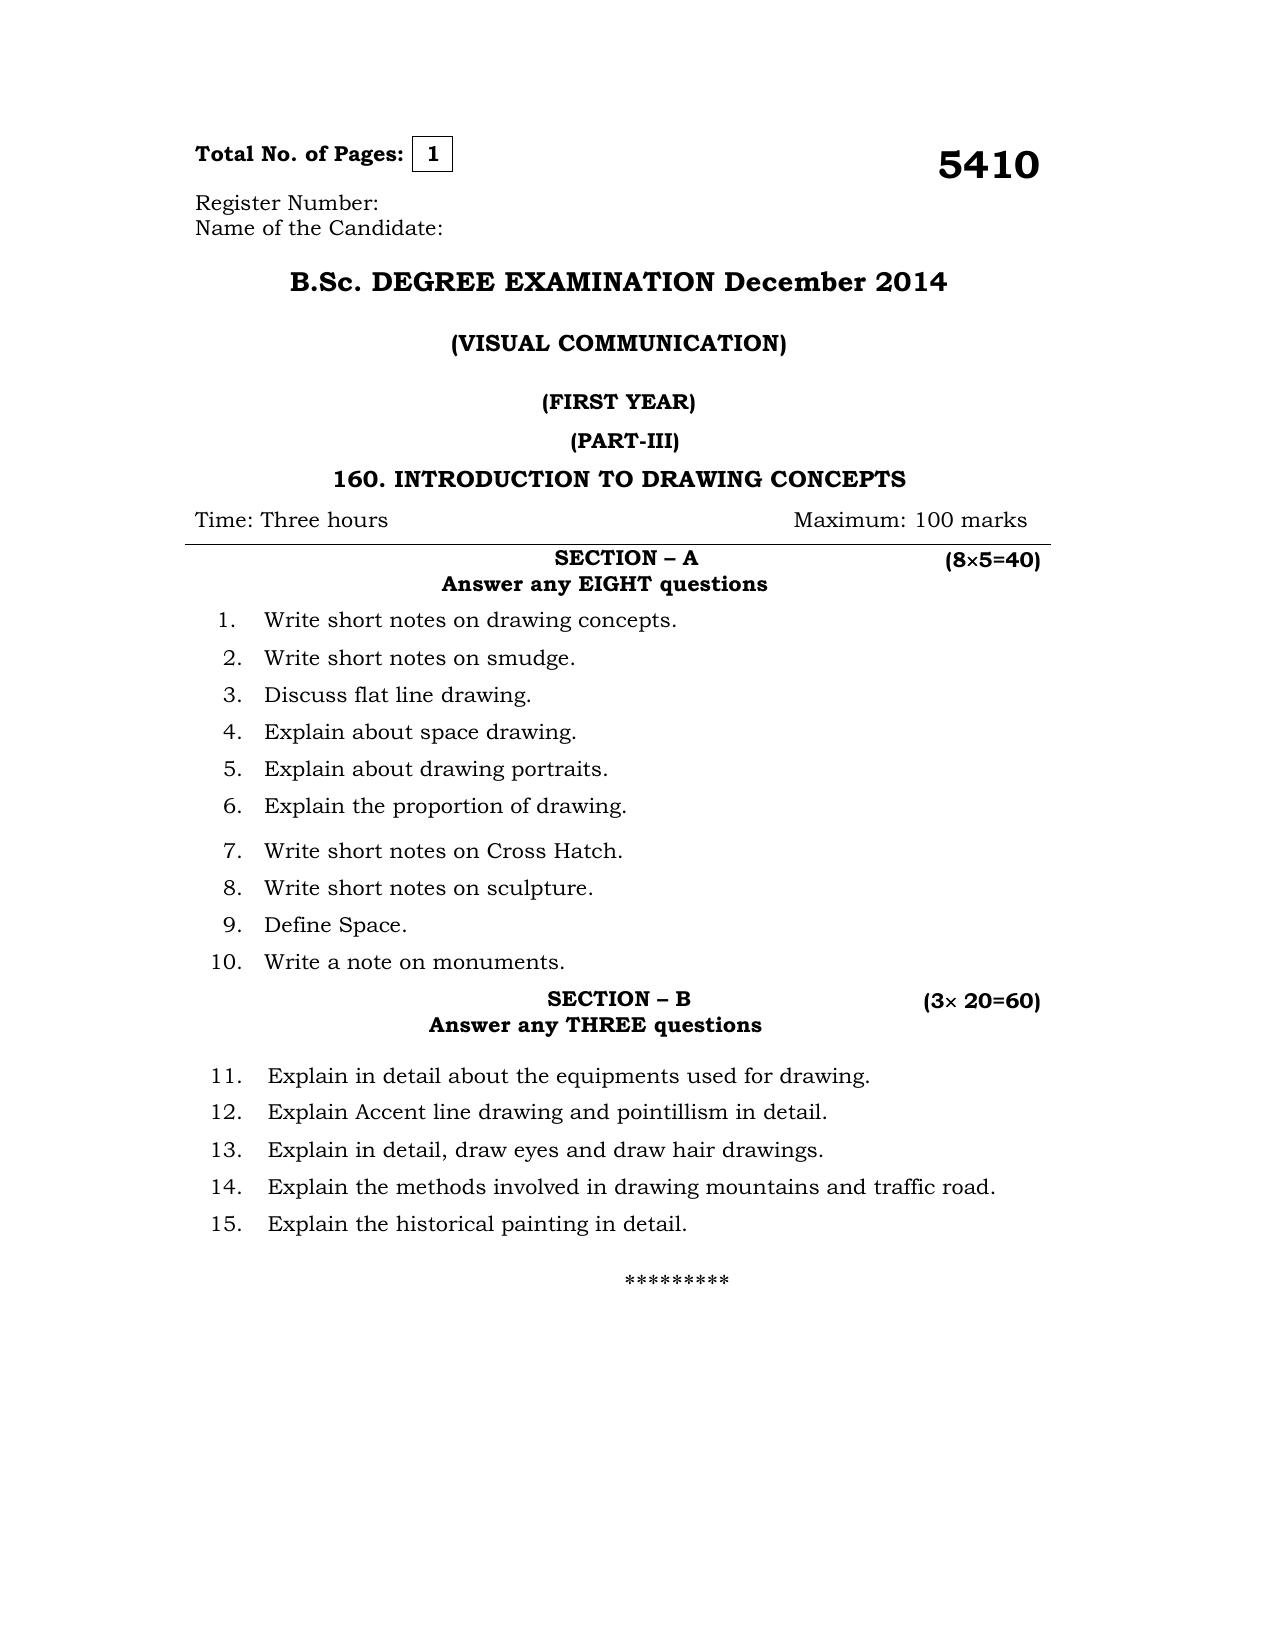 Annamalai University Introduction To Drawing Concepts B.Sc Visual Communication December 2014 Question Papers - Page 1